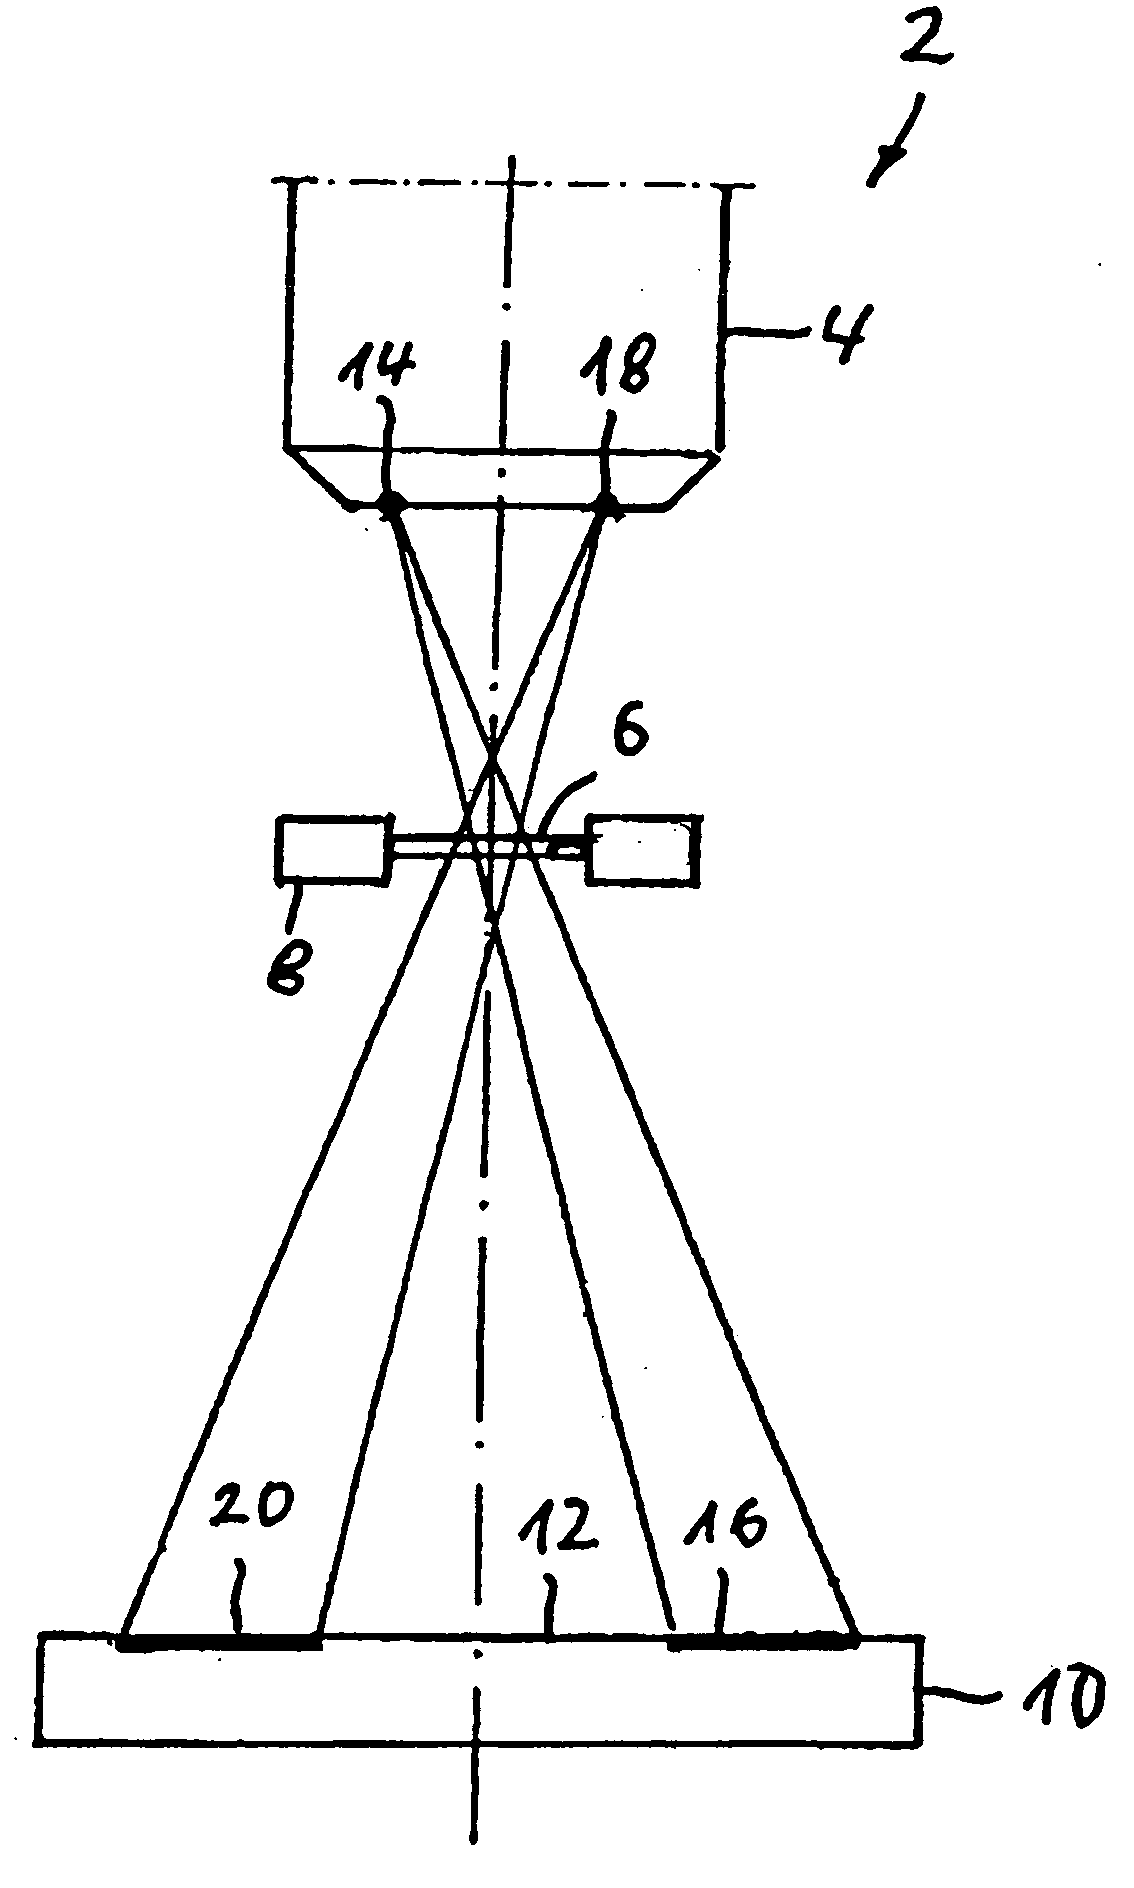 Apparatus for X-ray laminography and/or tomosynthesis